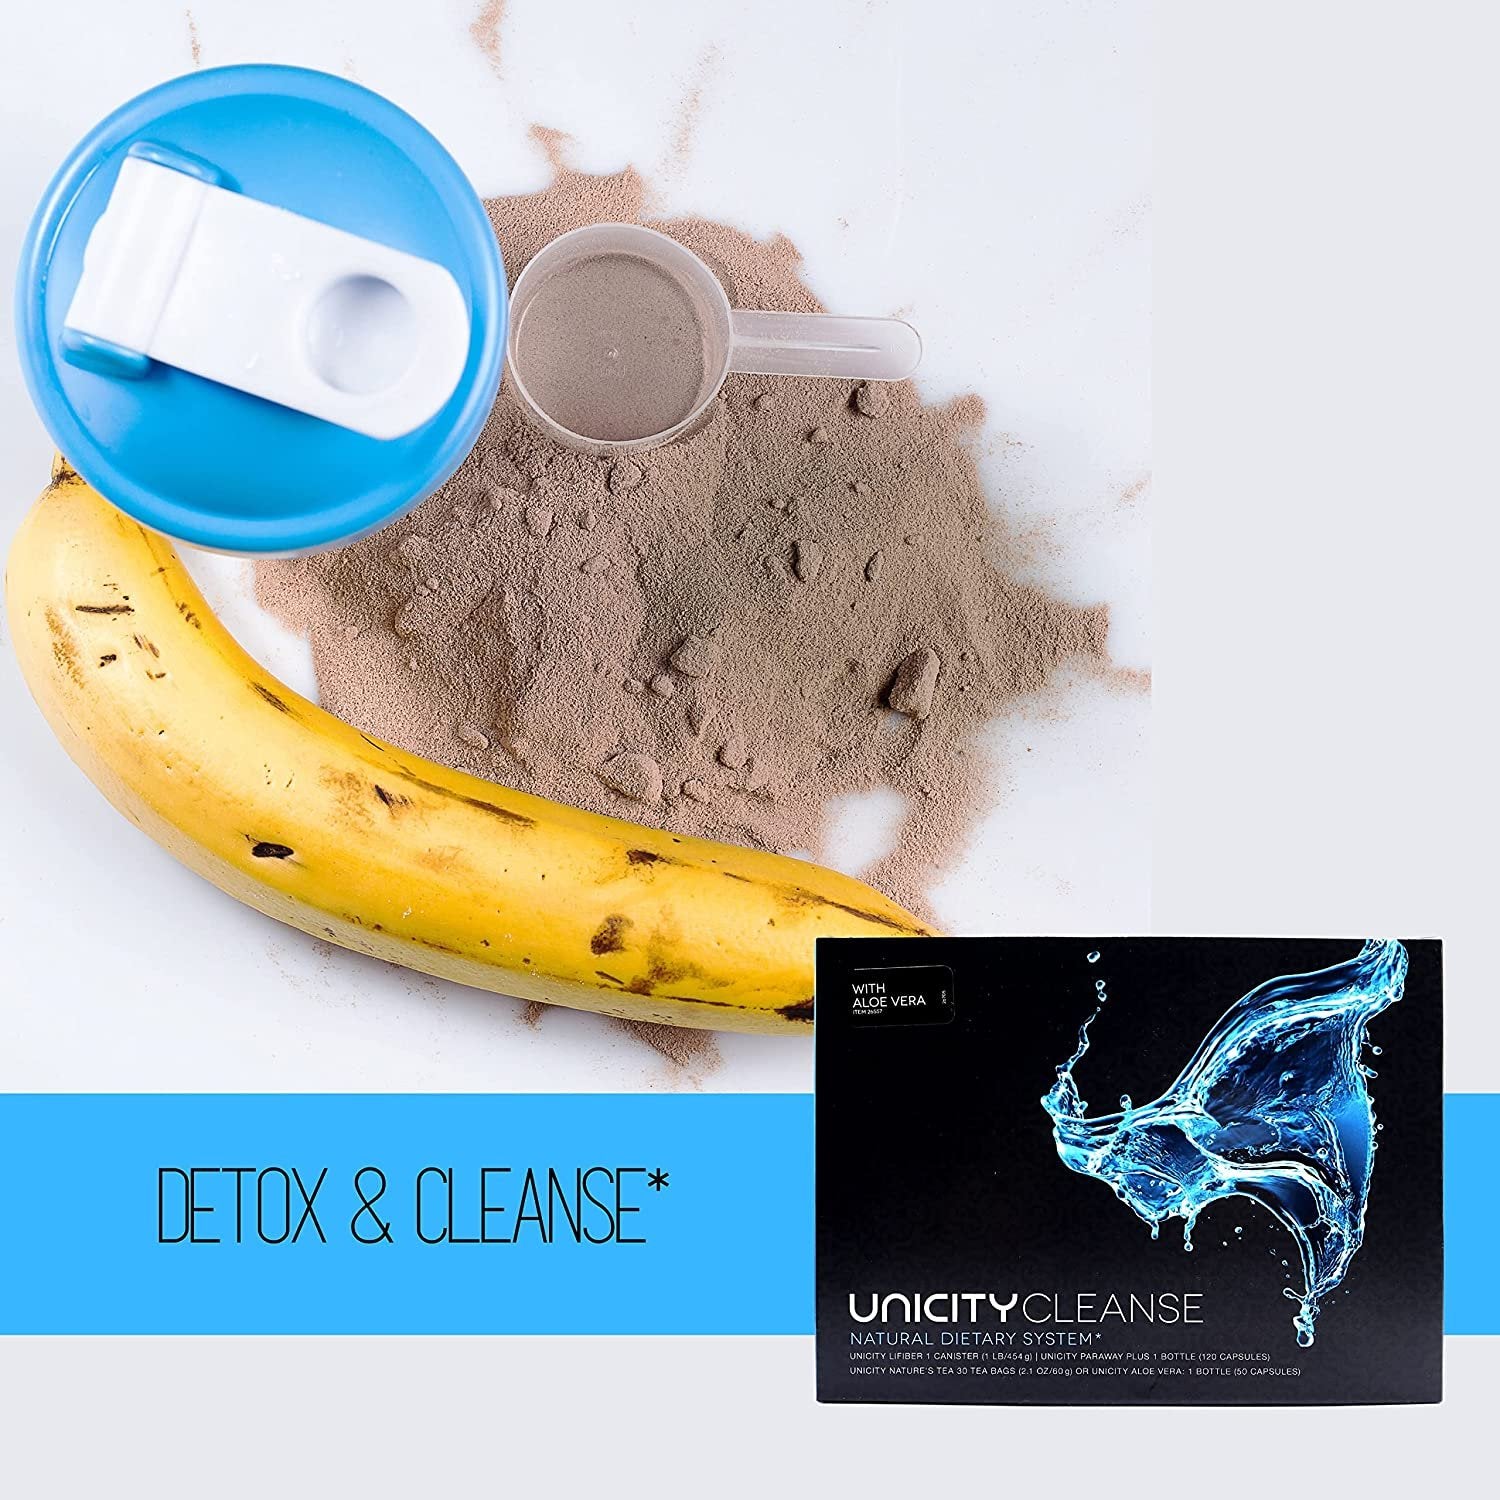 Unicity Cleanse with Aloe Vera Natural Dietary System - Healthy Detox Cleanse Kit of Unicity LiFiber Intestinal Cleanse, Paraway Plus Body Cleanse, and Aloe Vera Gastrointestinal Support